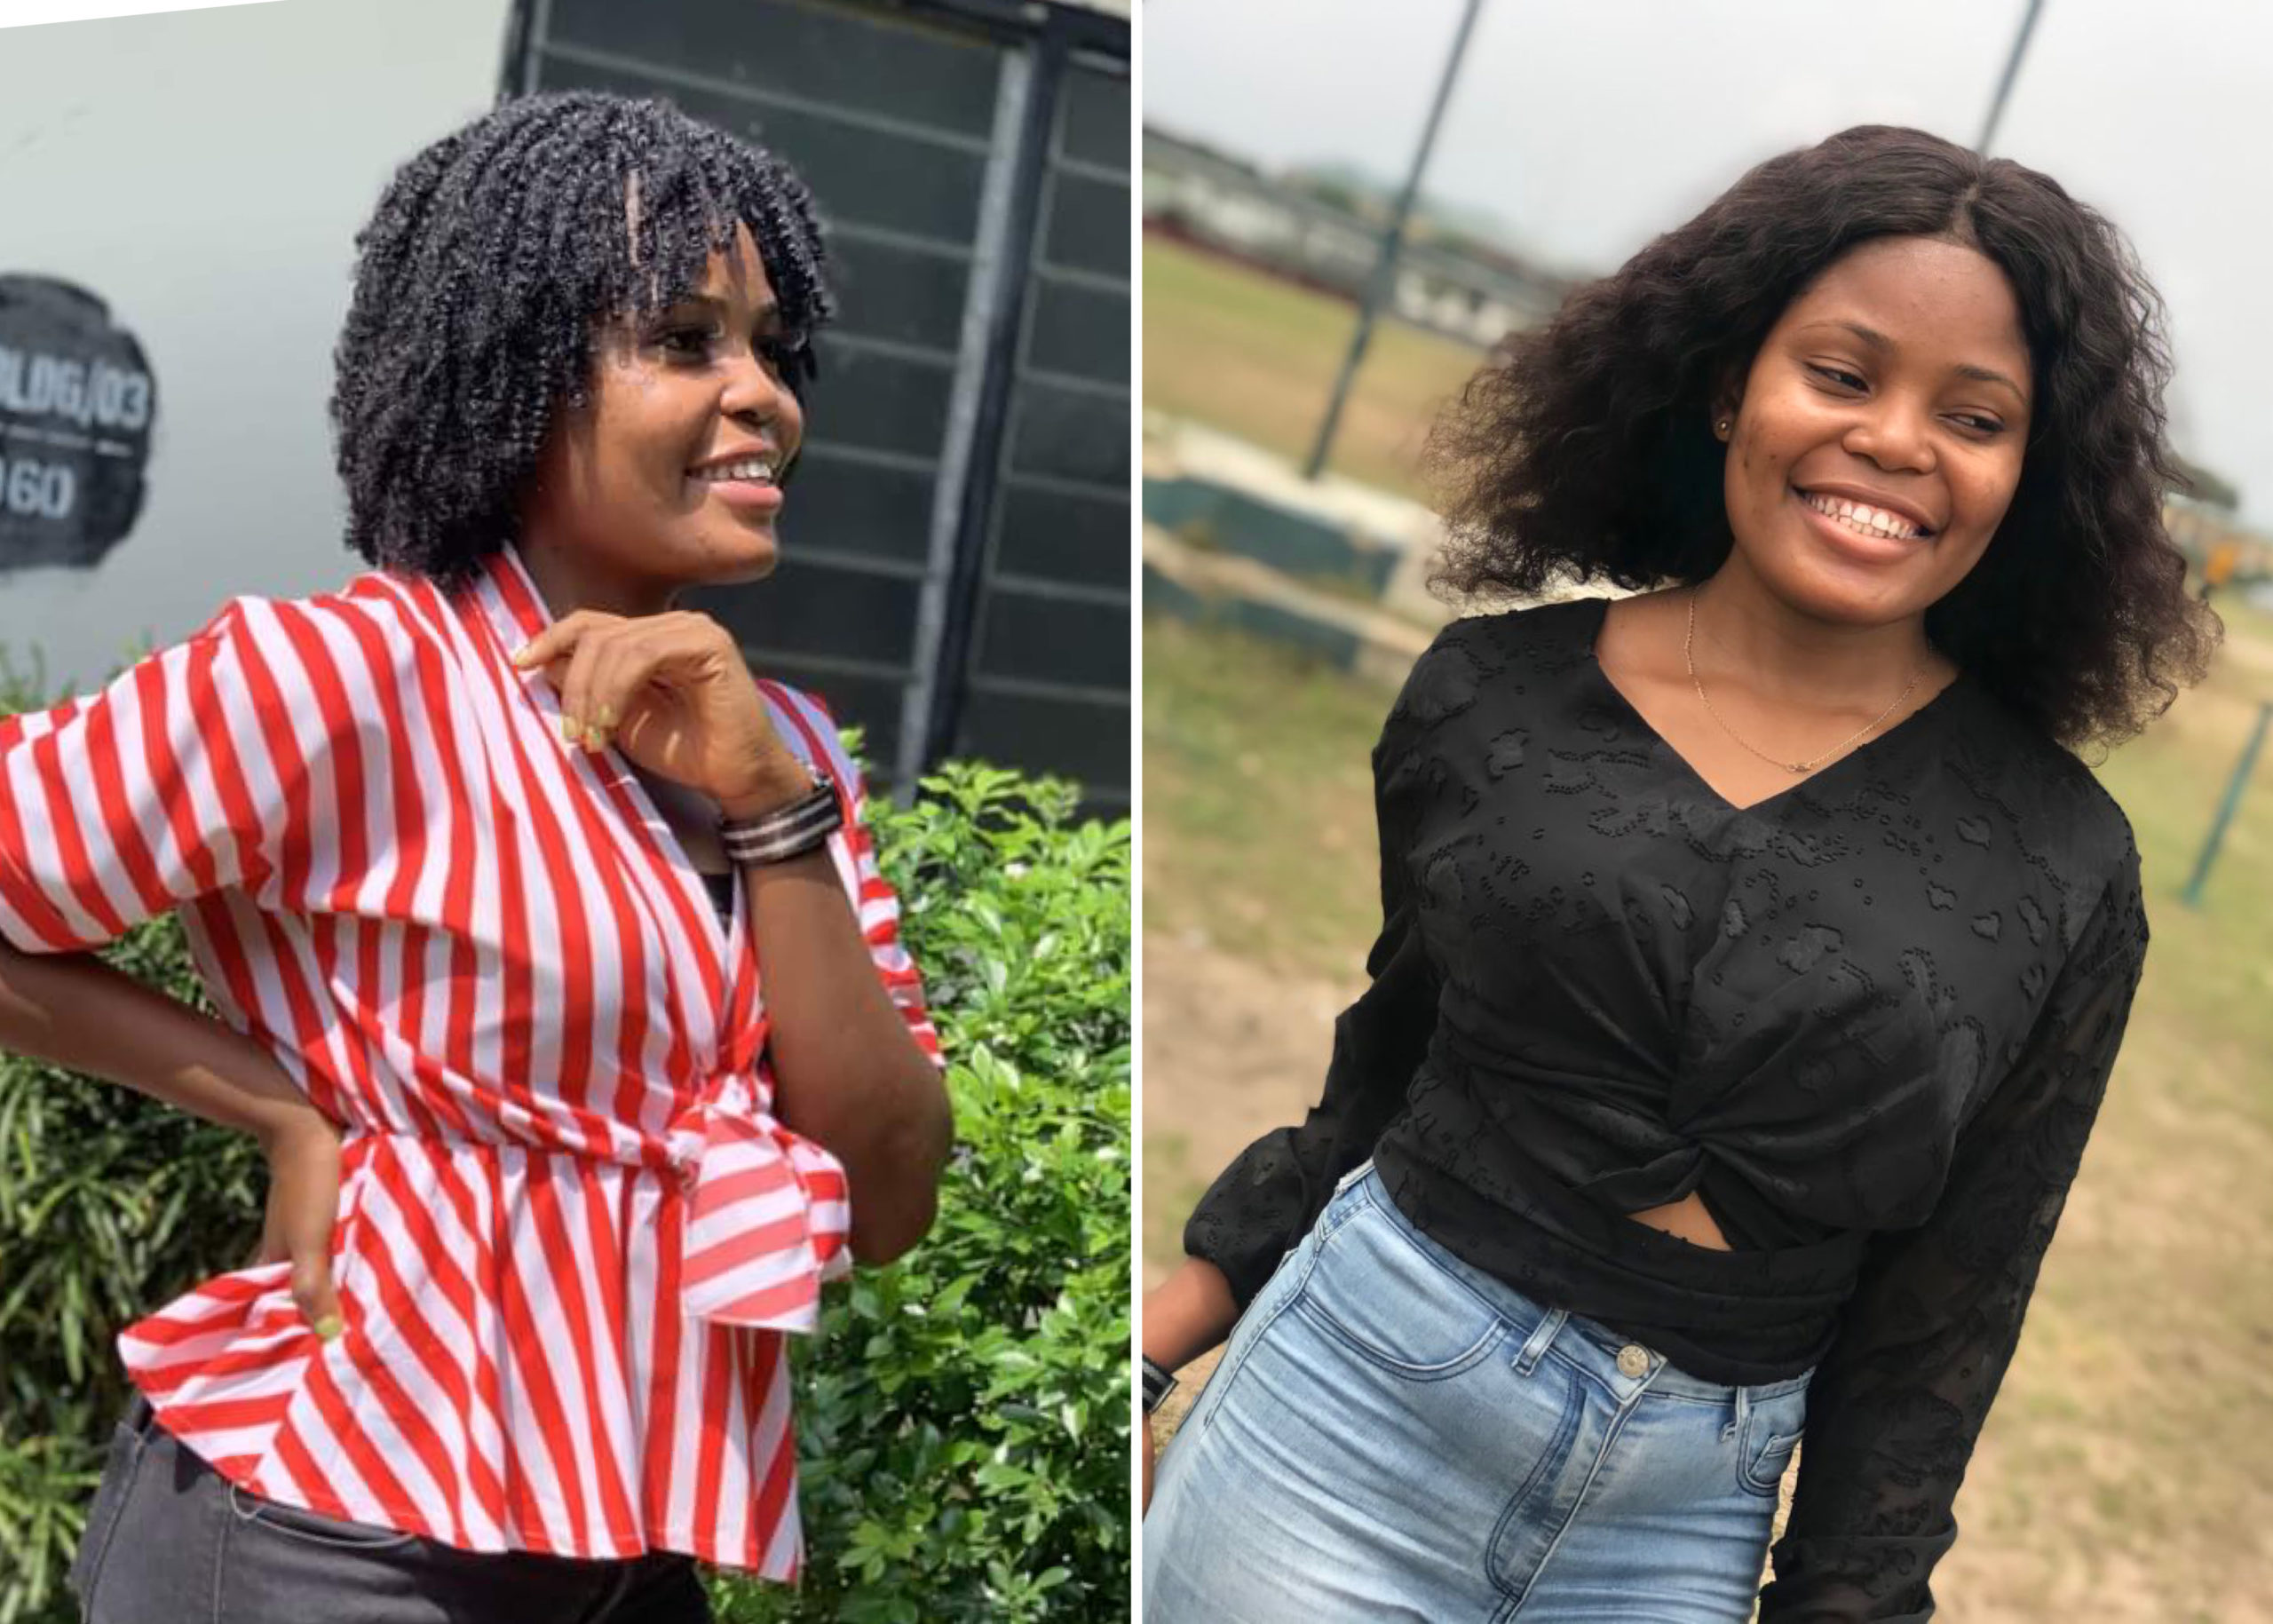 #FindHinyUmoren: Lady Raises Alarm Over Disappearance Of Friend Who Left Home For Job Interview In Akwa Ibom